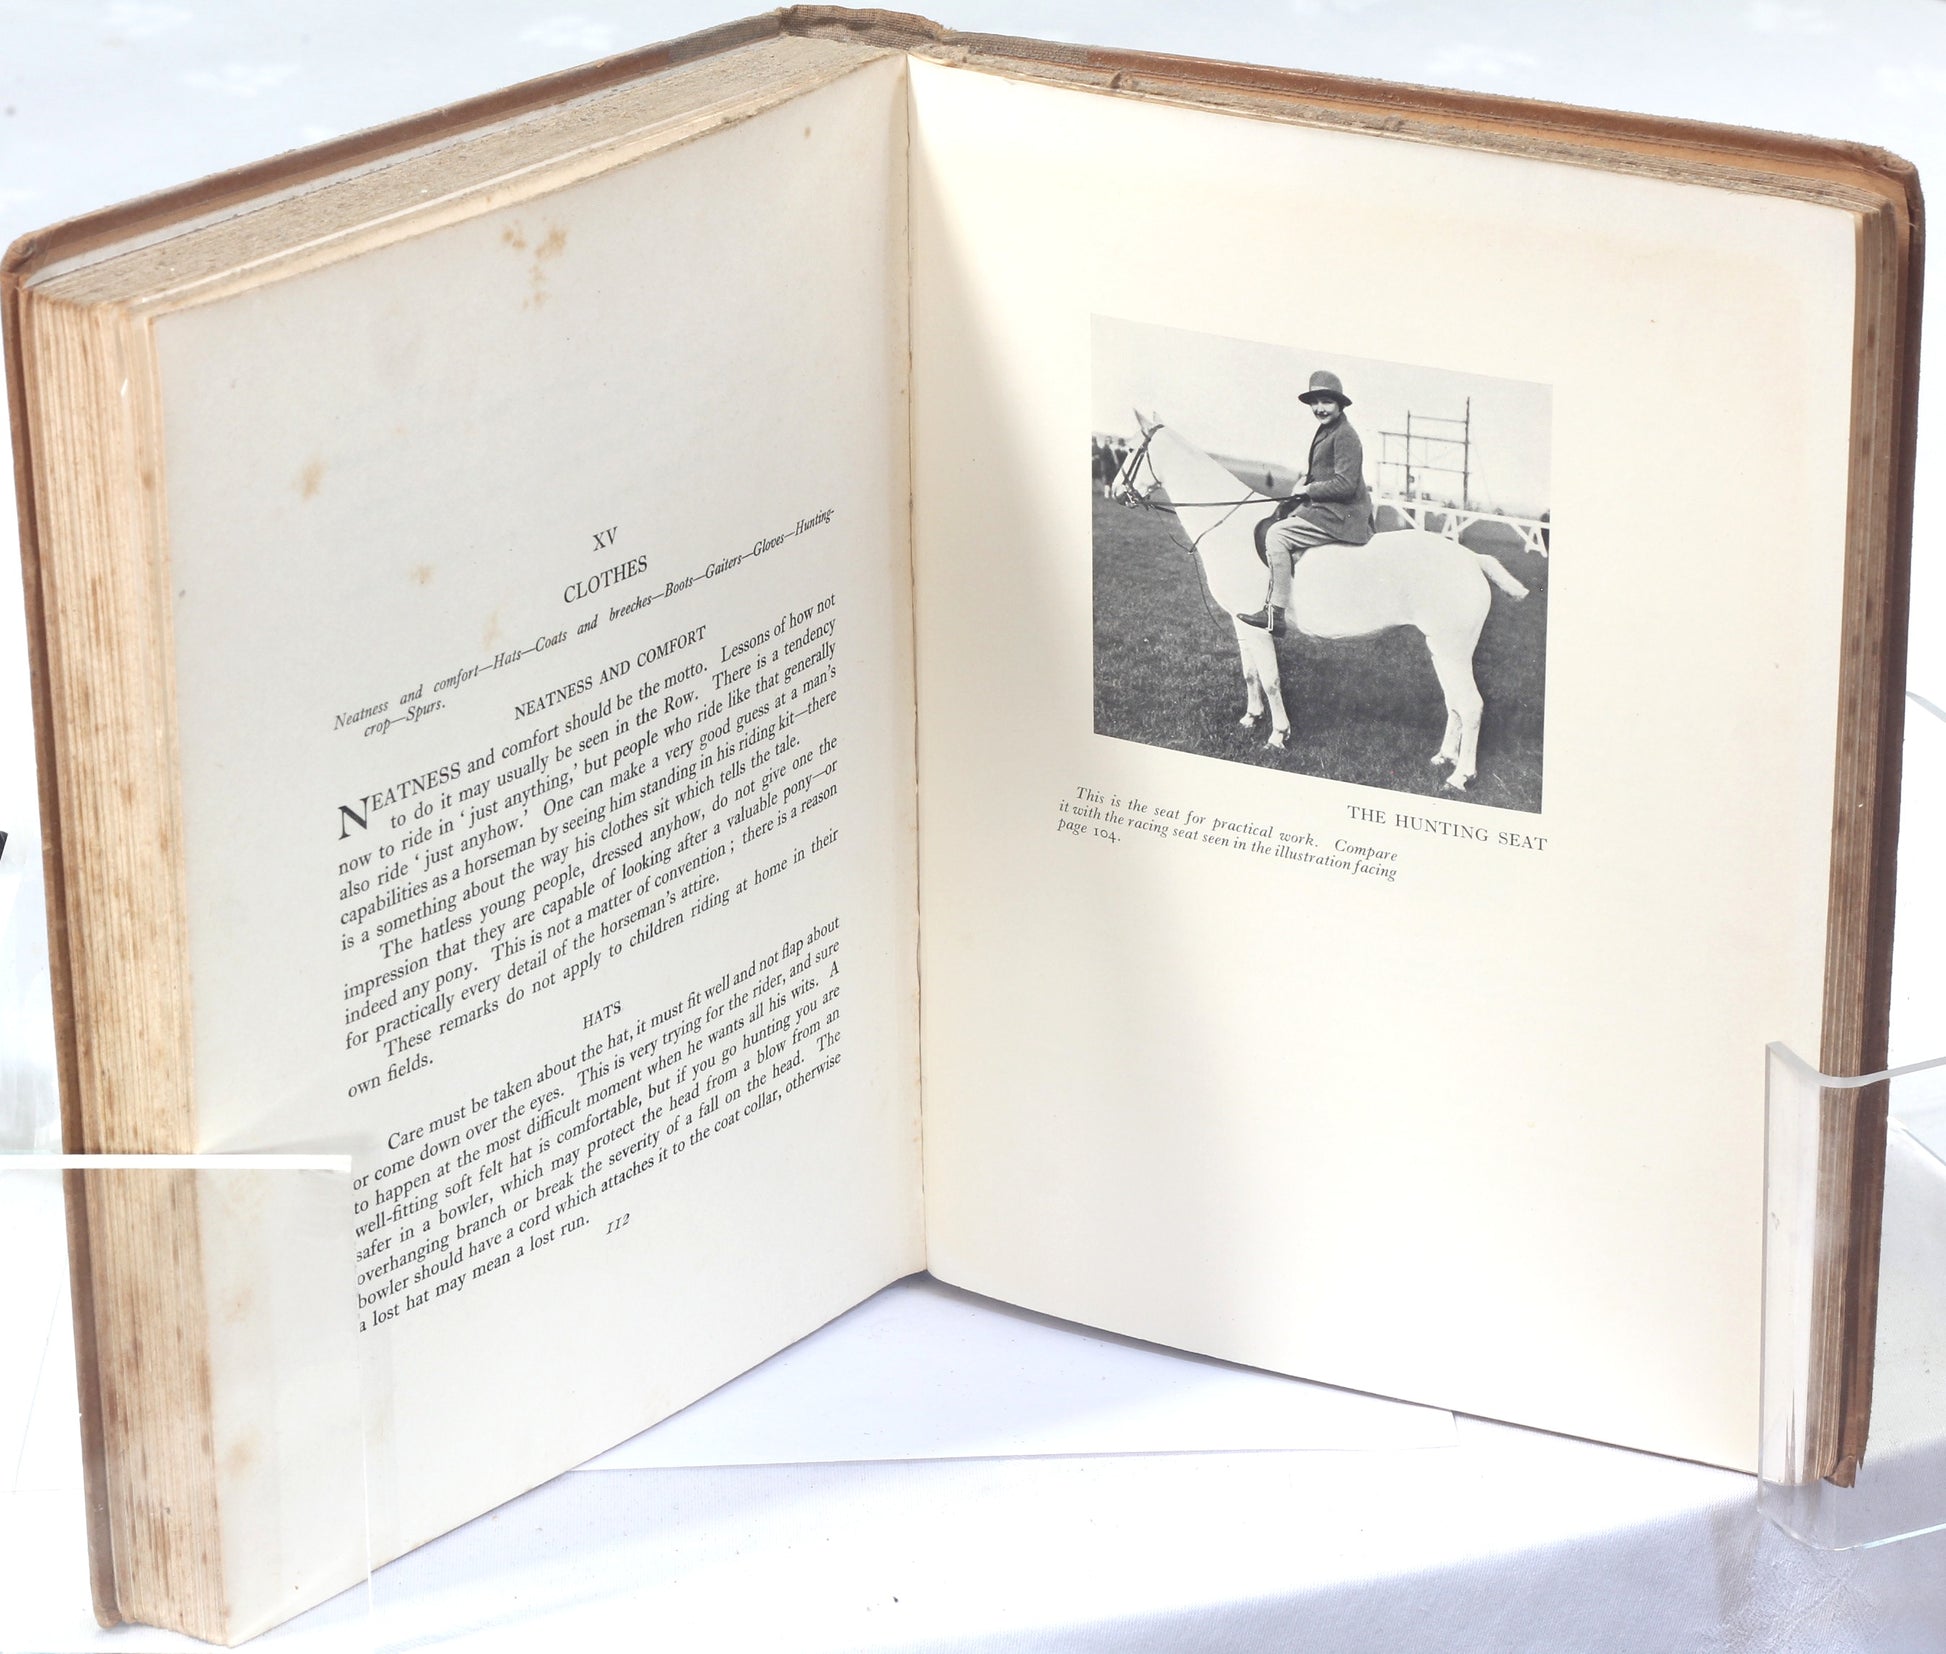 The Young Rider , Ponies for Health and Pleasure by Golden Gorse, 1st Ed 1928